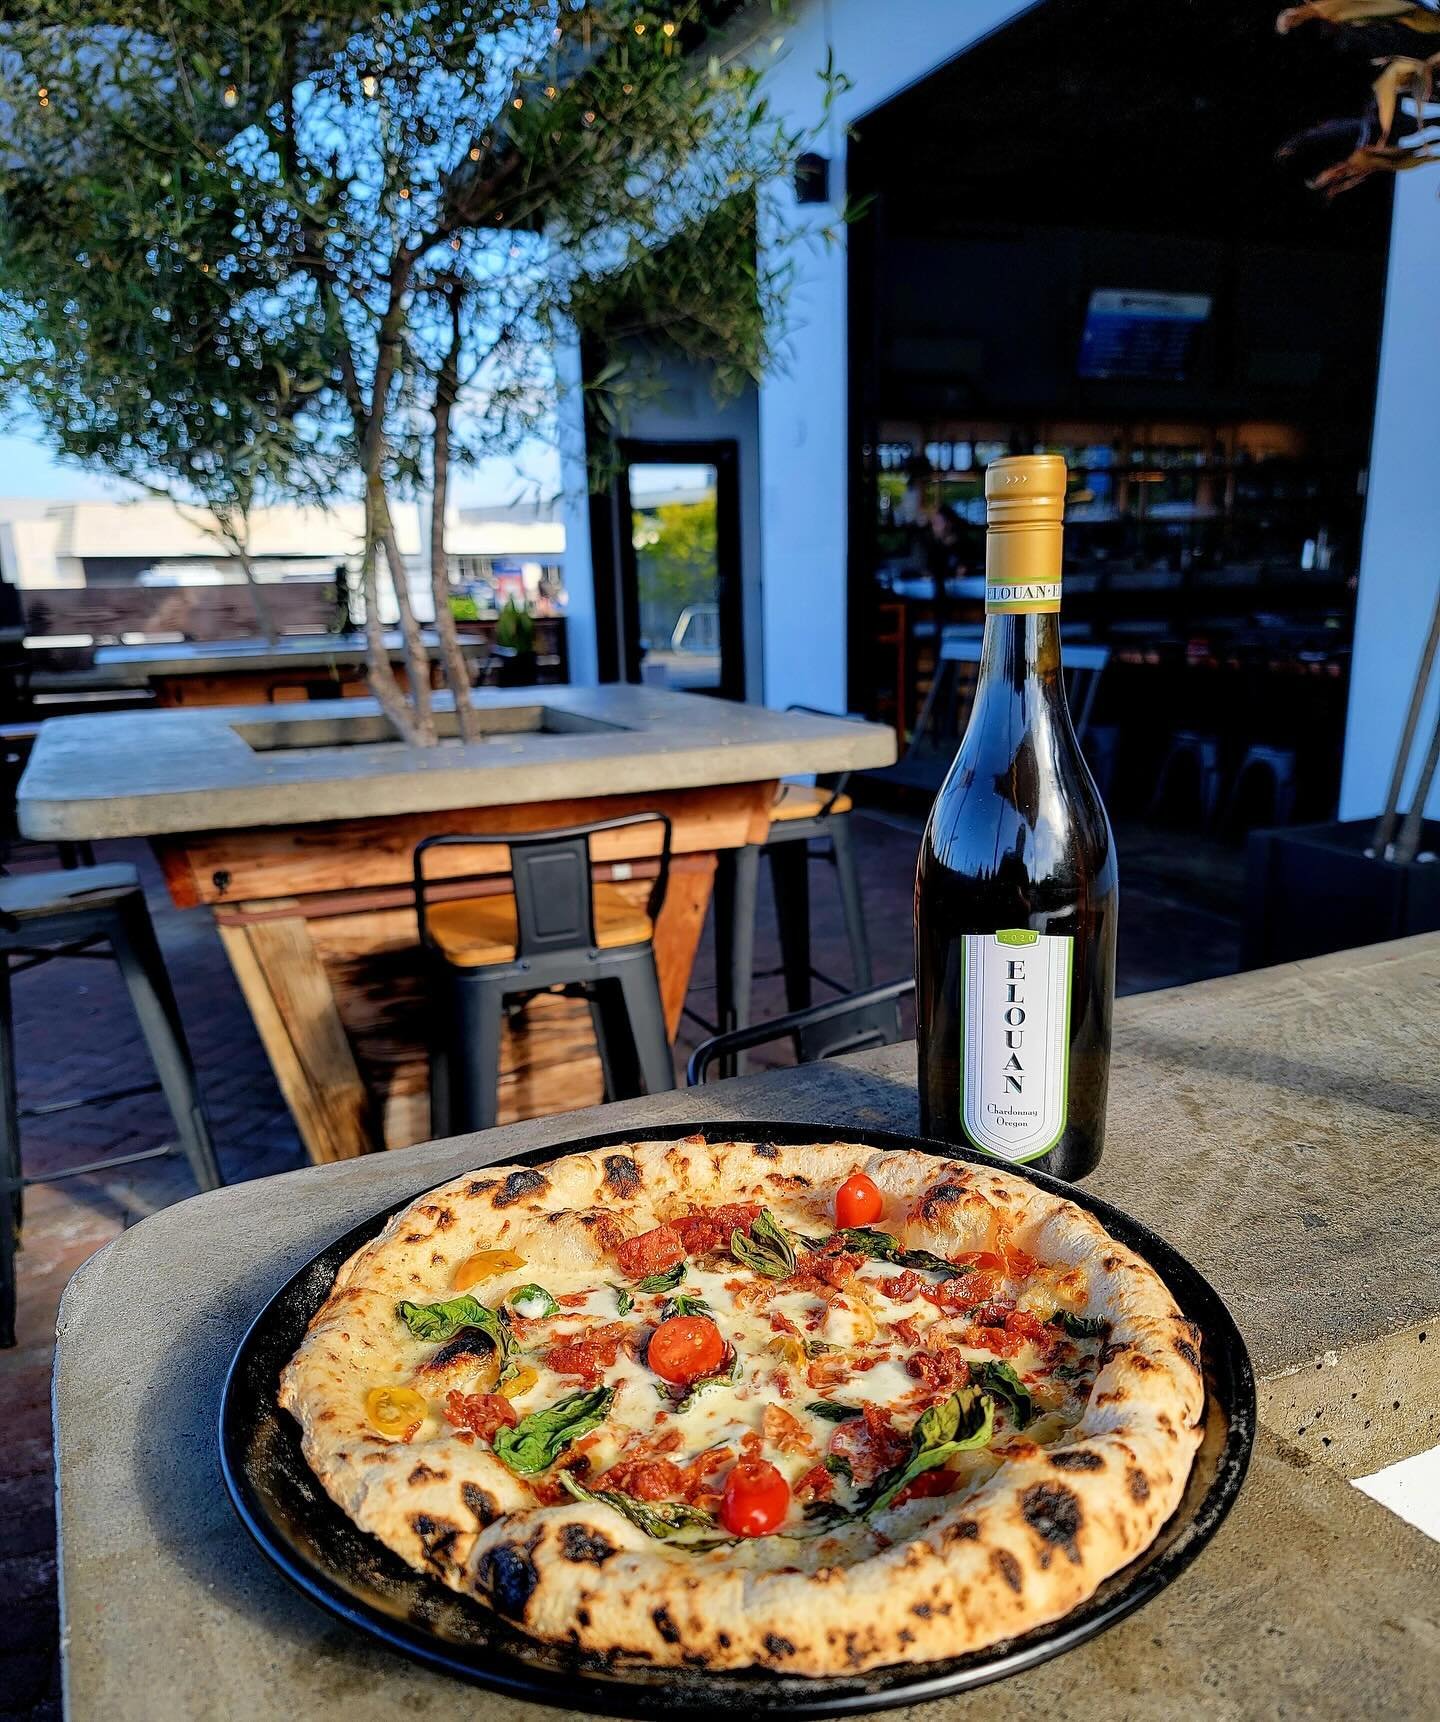 Special Wine and Pizza Pairing! 🍷 🍕 
Thursday Special + Live Music 6:30-8:30 🎶 

$50 for a bottle of Elouan Vintage Chardonnay + a Crispy Prosciutto Pizza 

Crispy Prosciutto Pizza with Mascarpone, Smoked Mozzarella, Fresh Mozzarella, Fresh Basil 